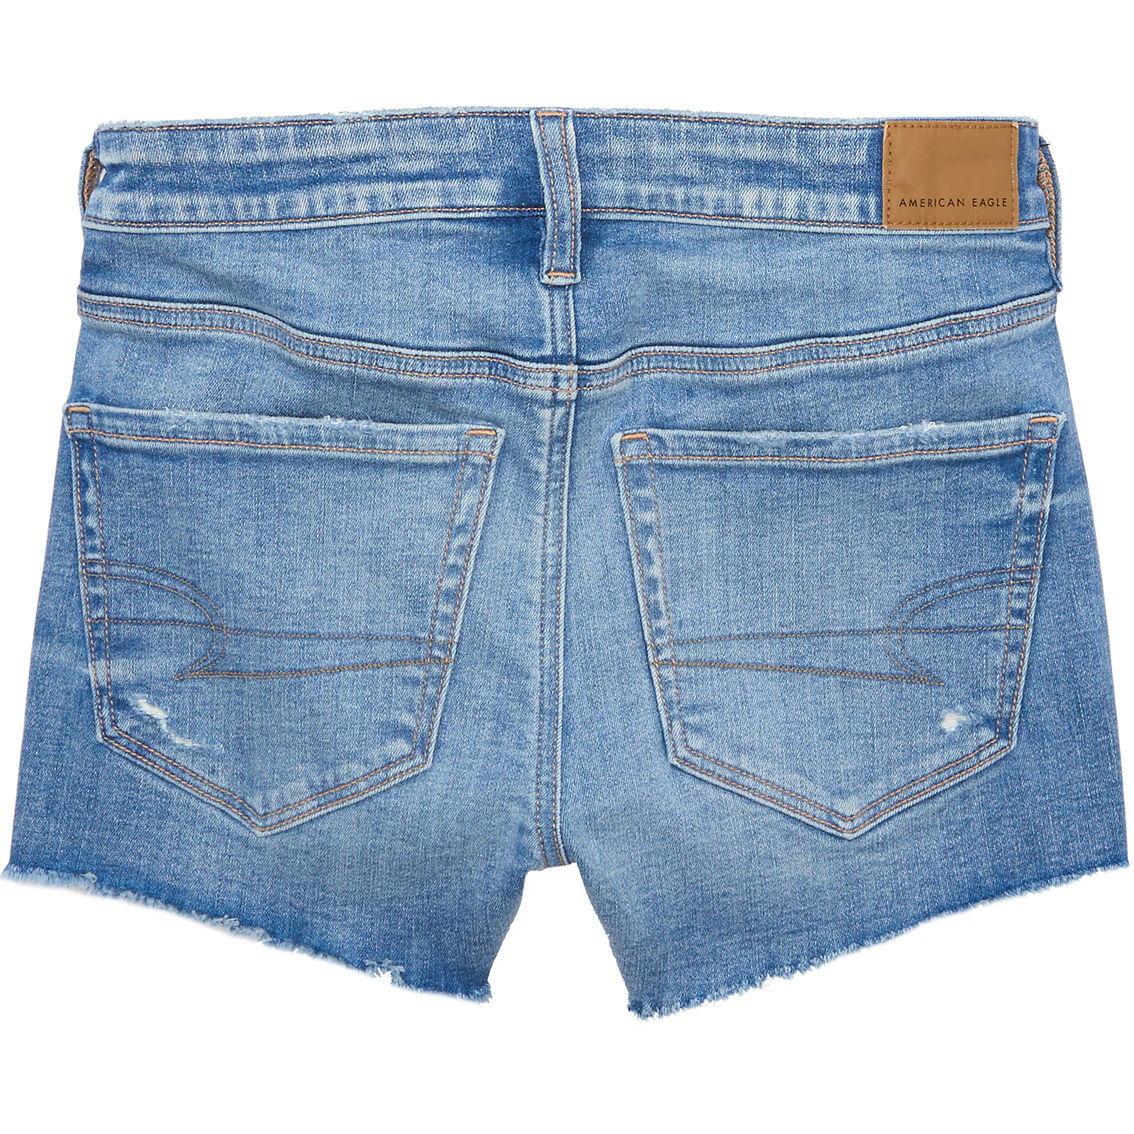 American Eagle High Rise Shortie Shorts - Image 2 of 2